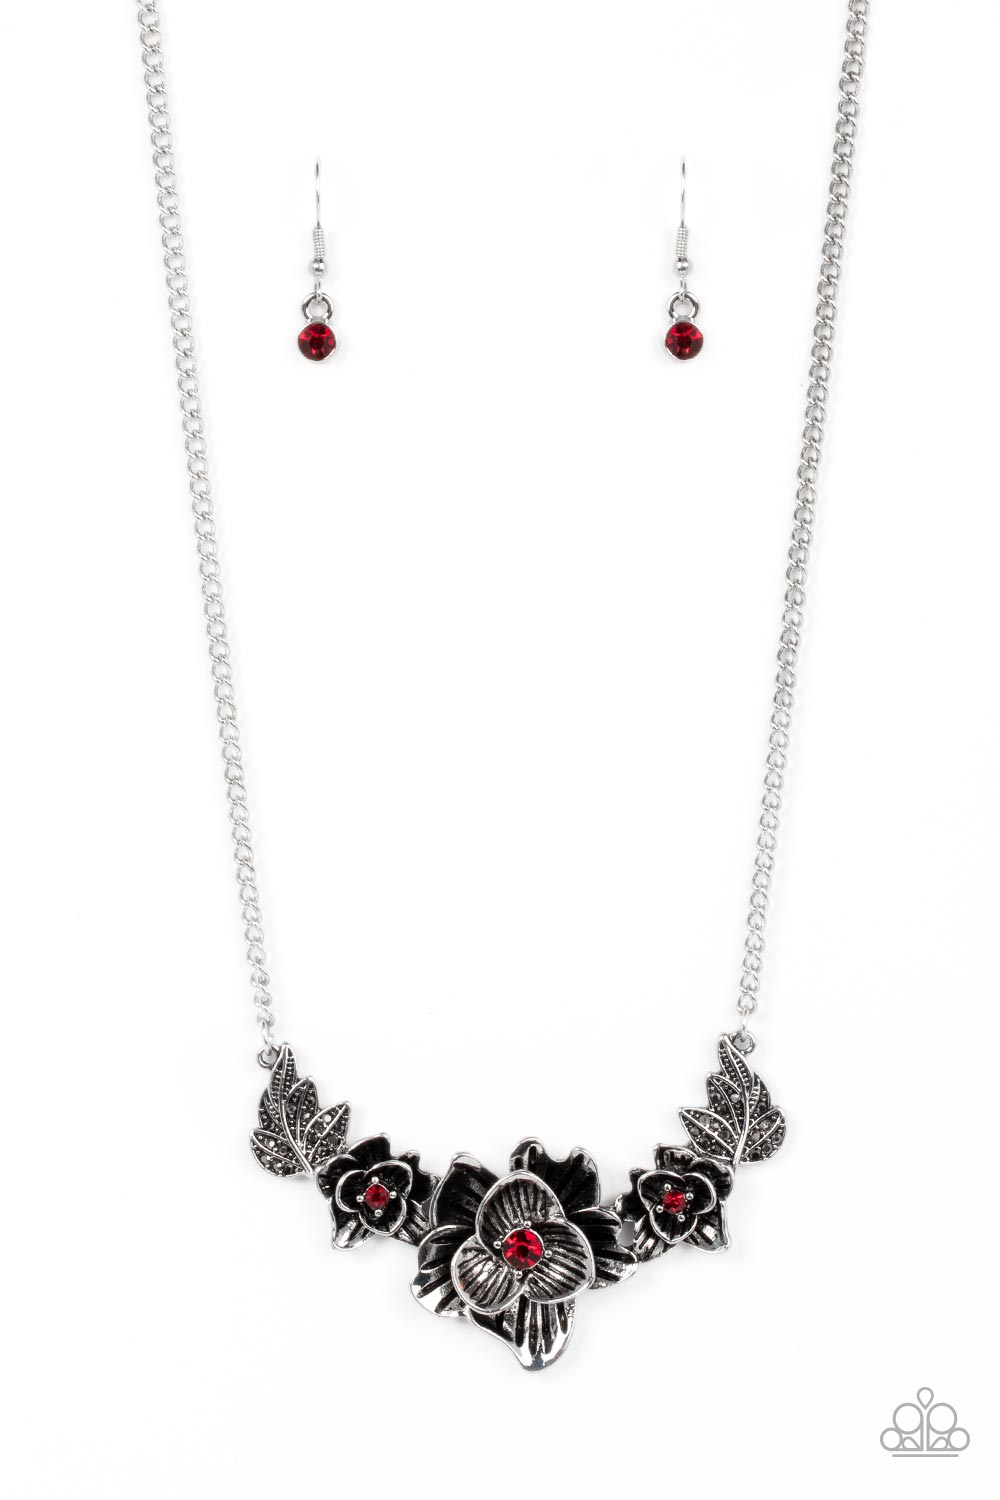 Necklace - Botanical Breeze - Red